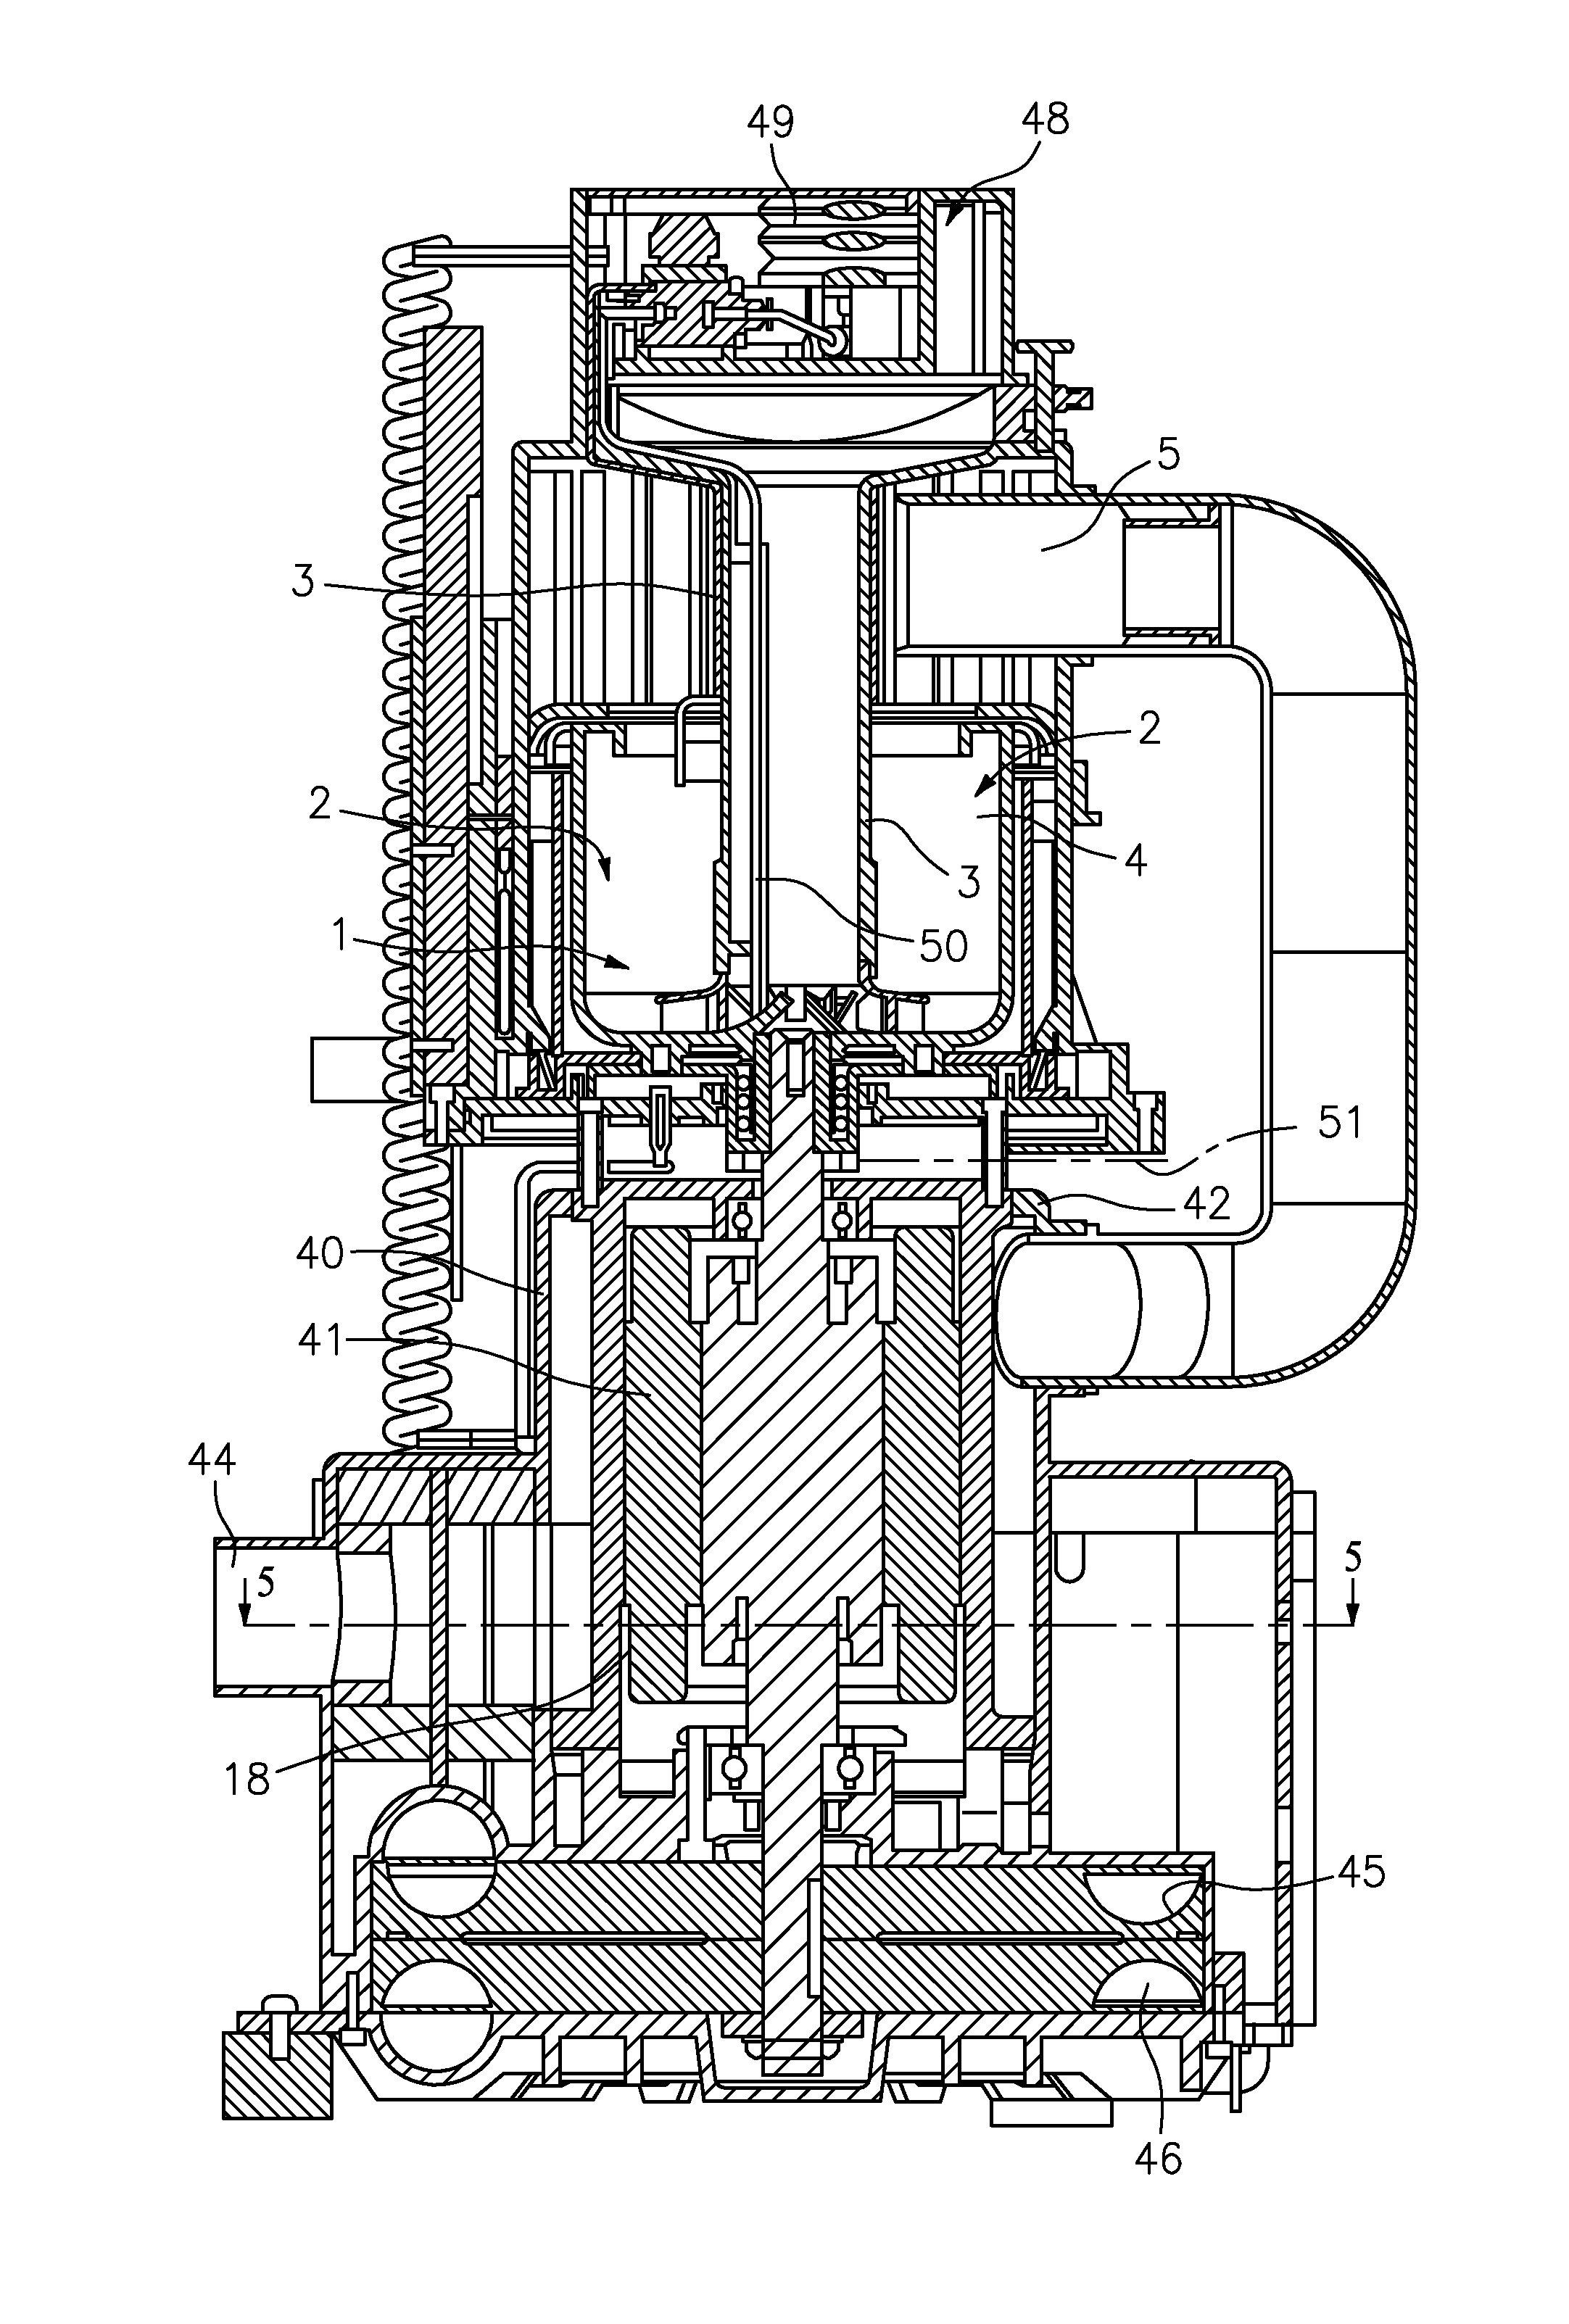 Separator for separating air and solids from a dental waste water mixture